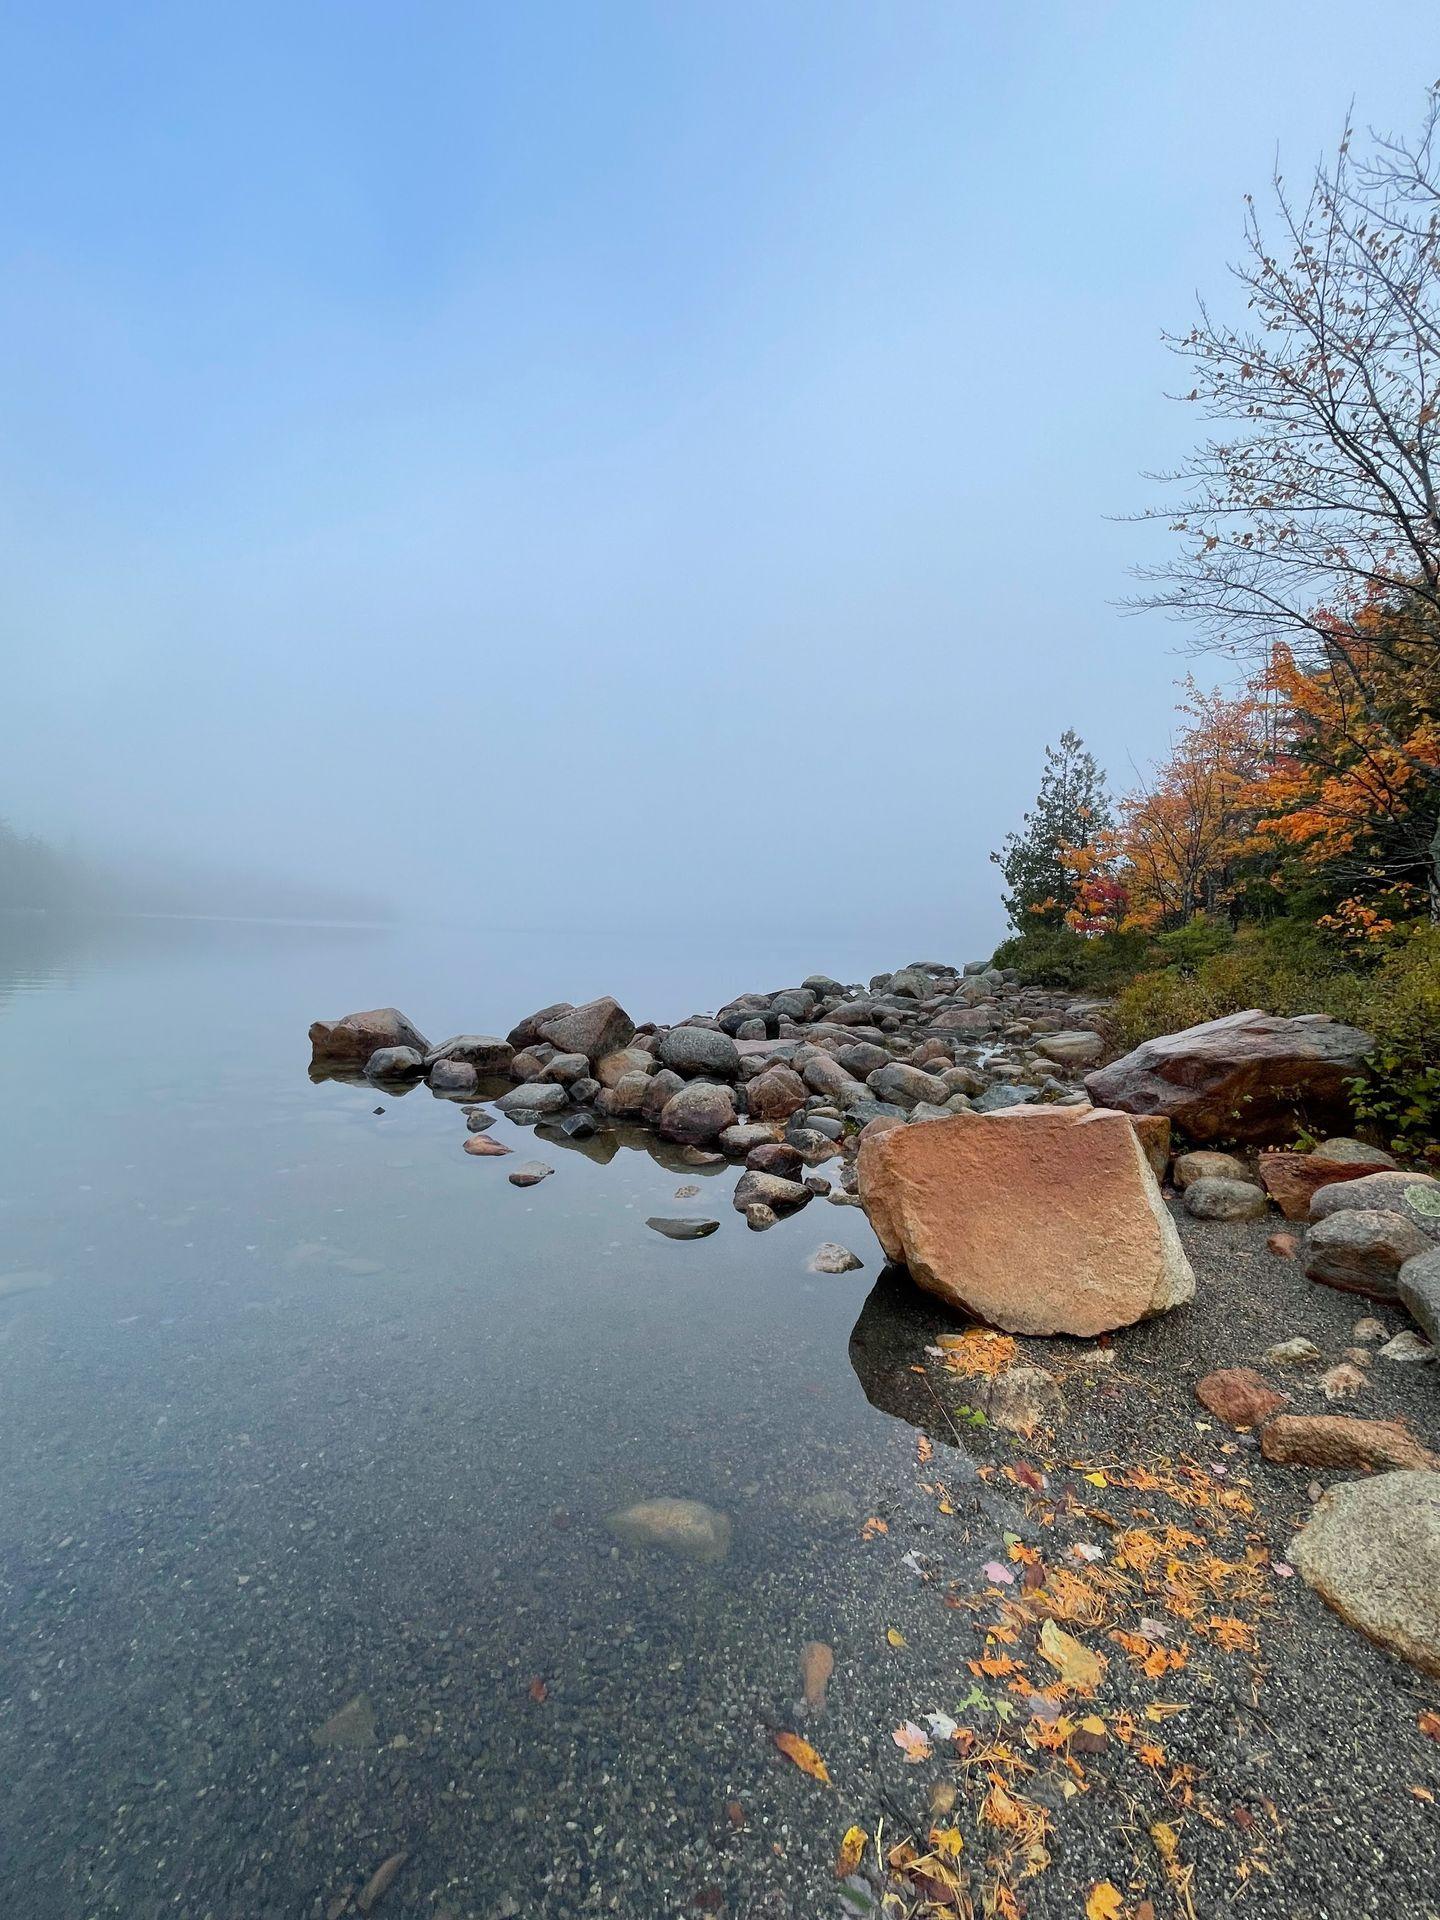 A view of Jordan Pond on a foggy day